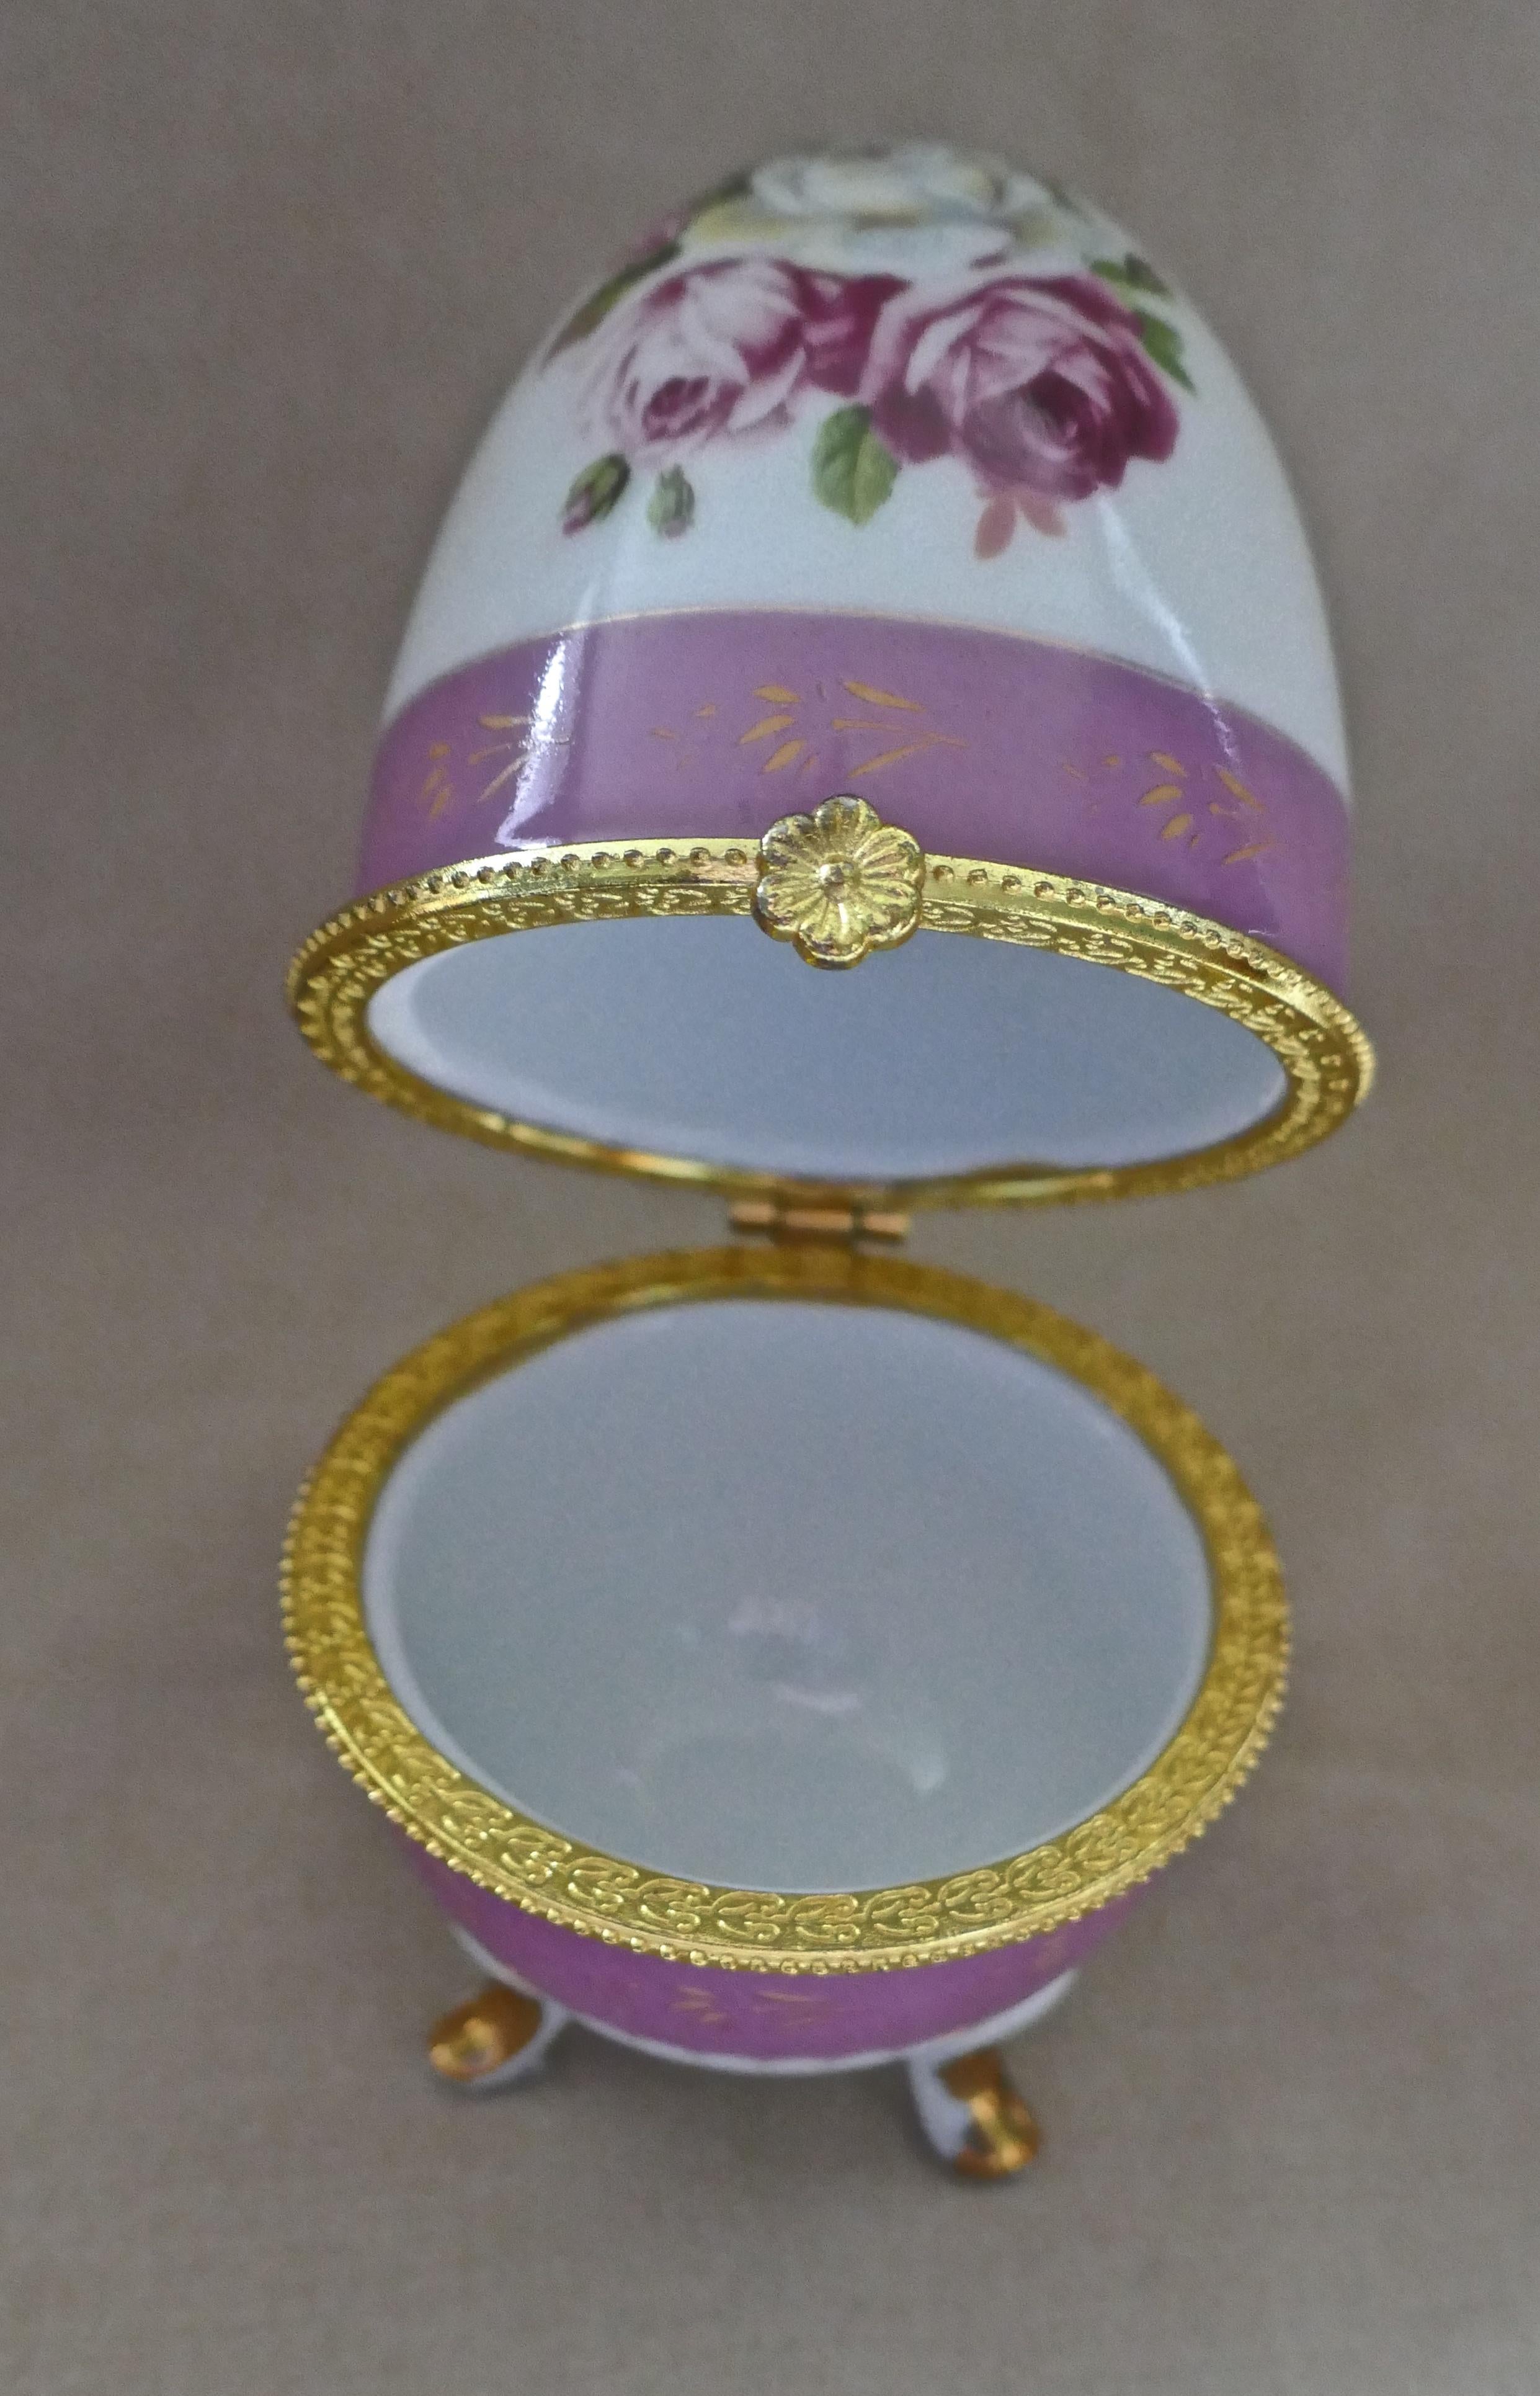 Vintage Rose Chintz Egg Shaped Ceramic Trinket Box with Hinged Lid For Sale 1